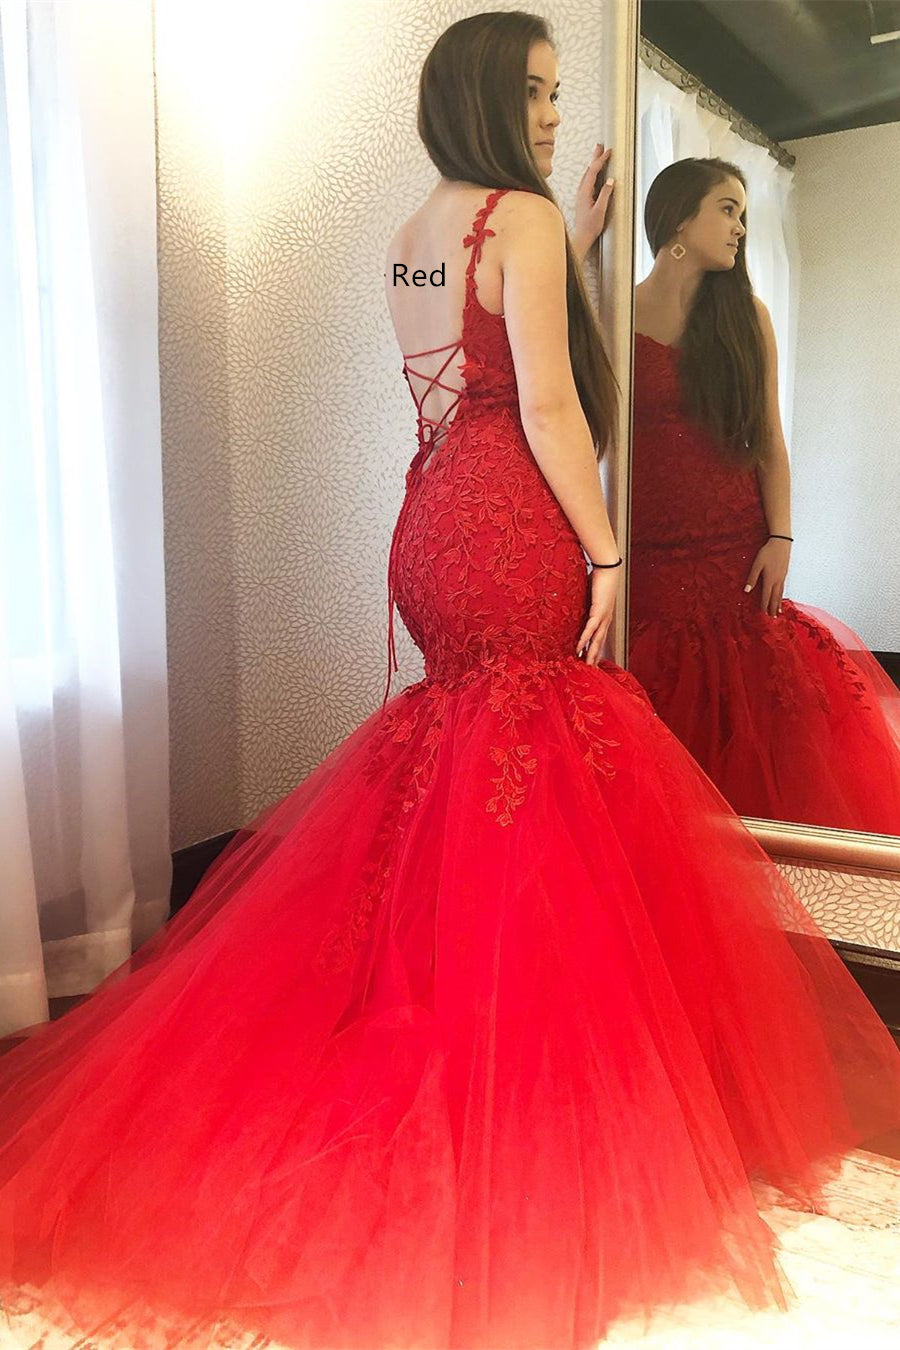 Fitted Lace Prom Dress 2020, Evening Dress, Formal Dress, Graduation School Party Gown, PC0482 - Promcoming